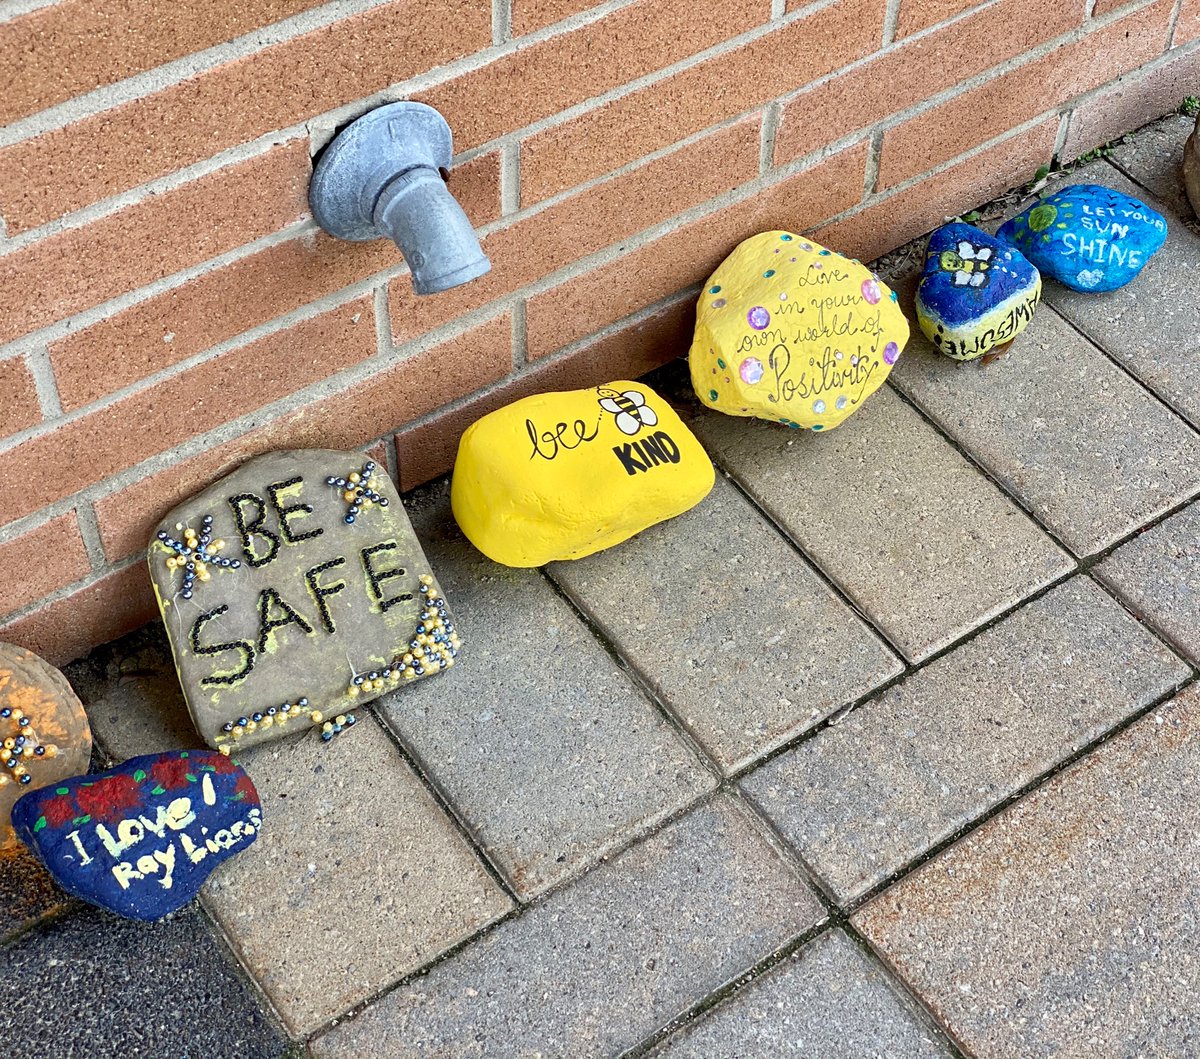 Our kindness rocks for @raylawsonps 💙💛
So nice to read all the beautiful inspirational messages from our #PeelFam makes you smile🌈 @ClimatePeel @PeelSchools